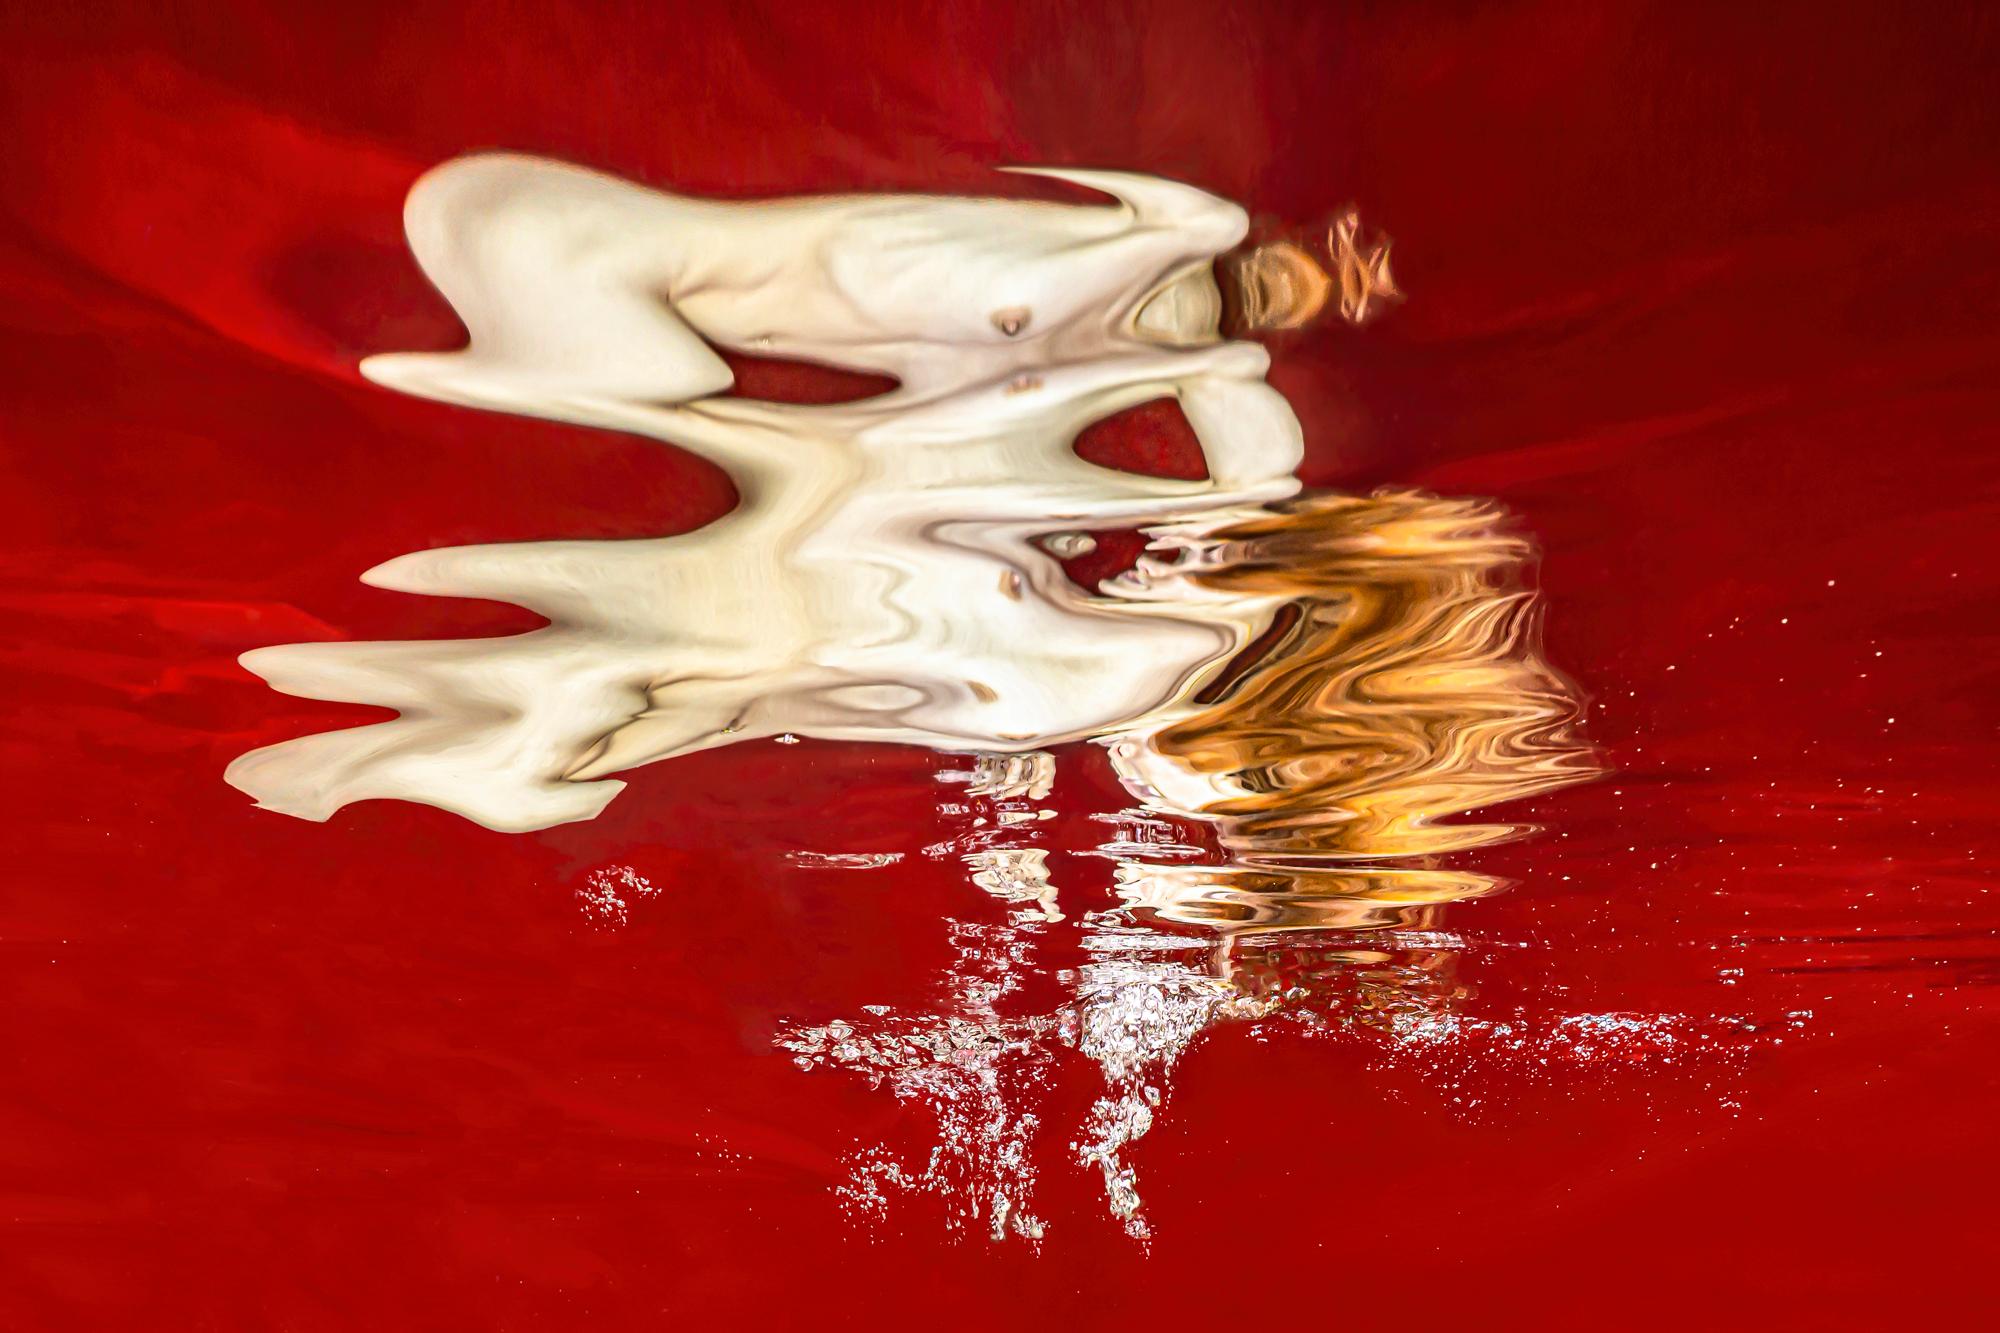 Alex Sher Abstract Photograph - Spark - underwater photograph - from series REFLECTIONS - archival pigment print